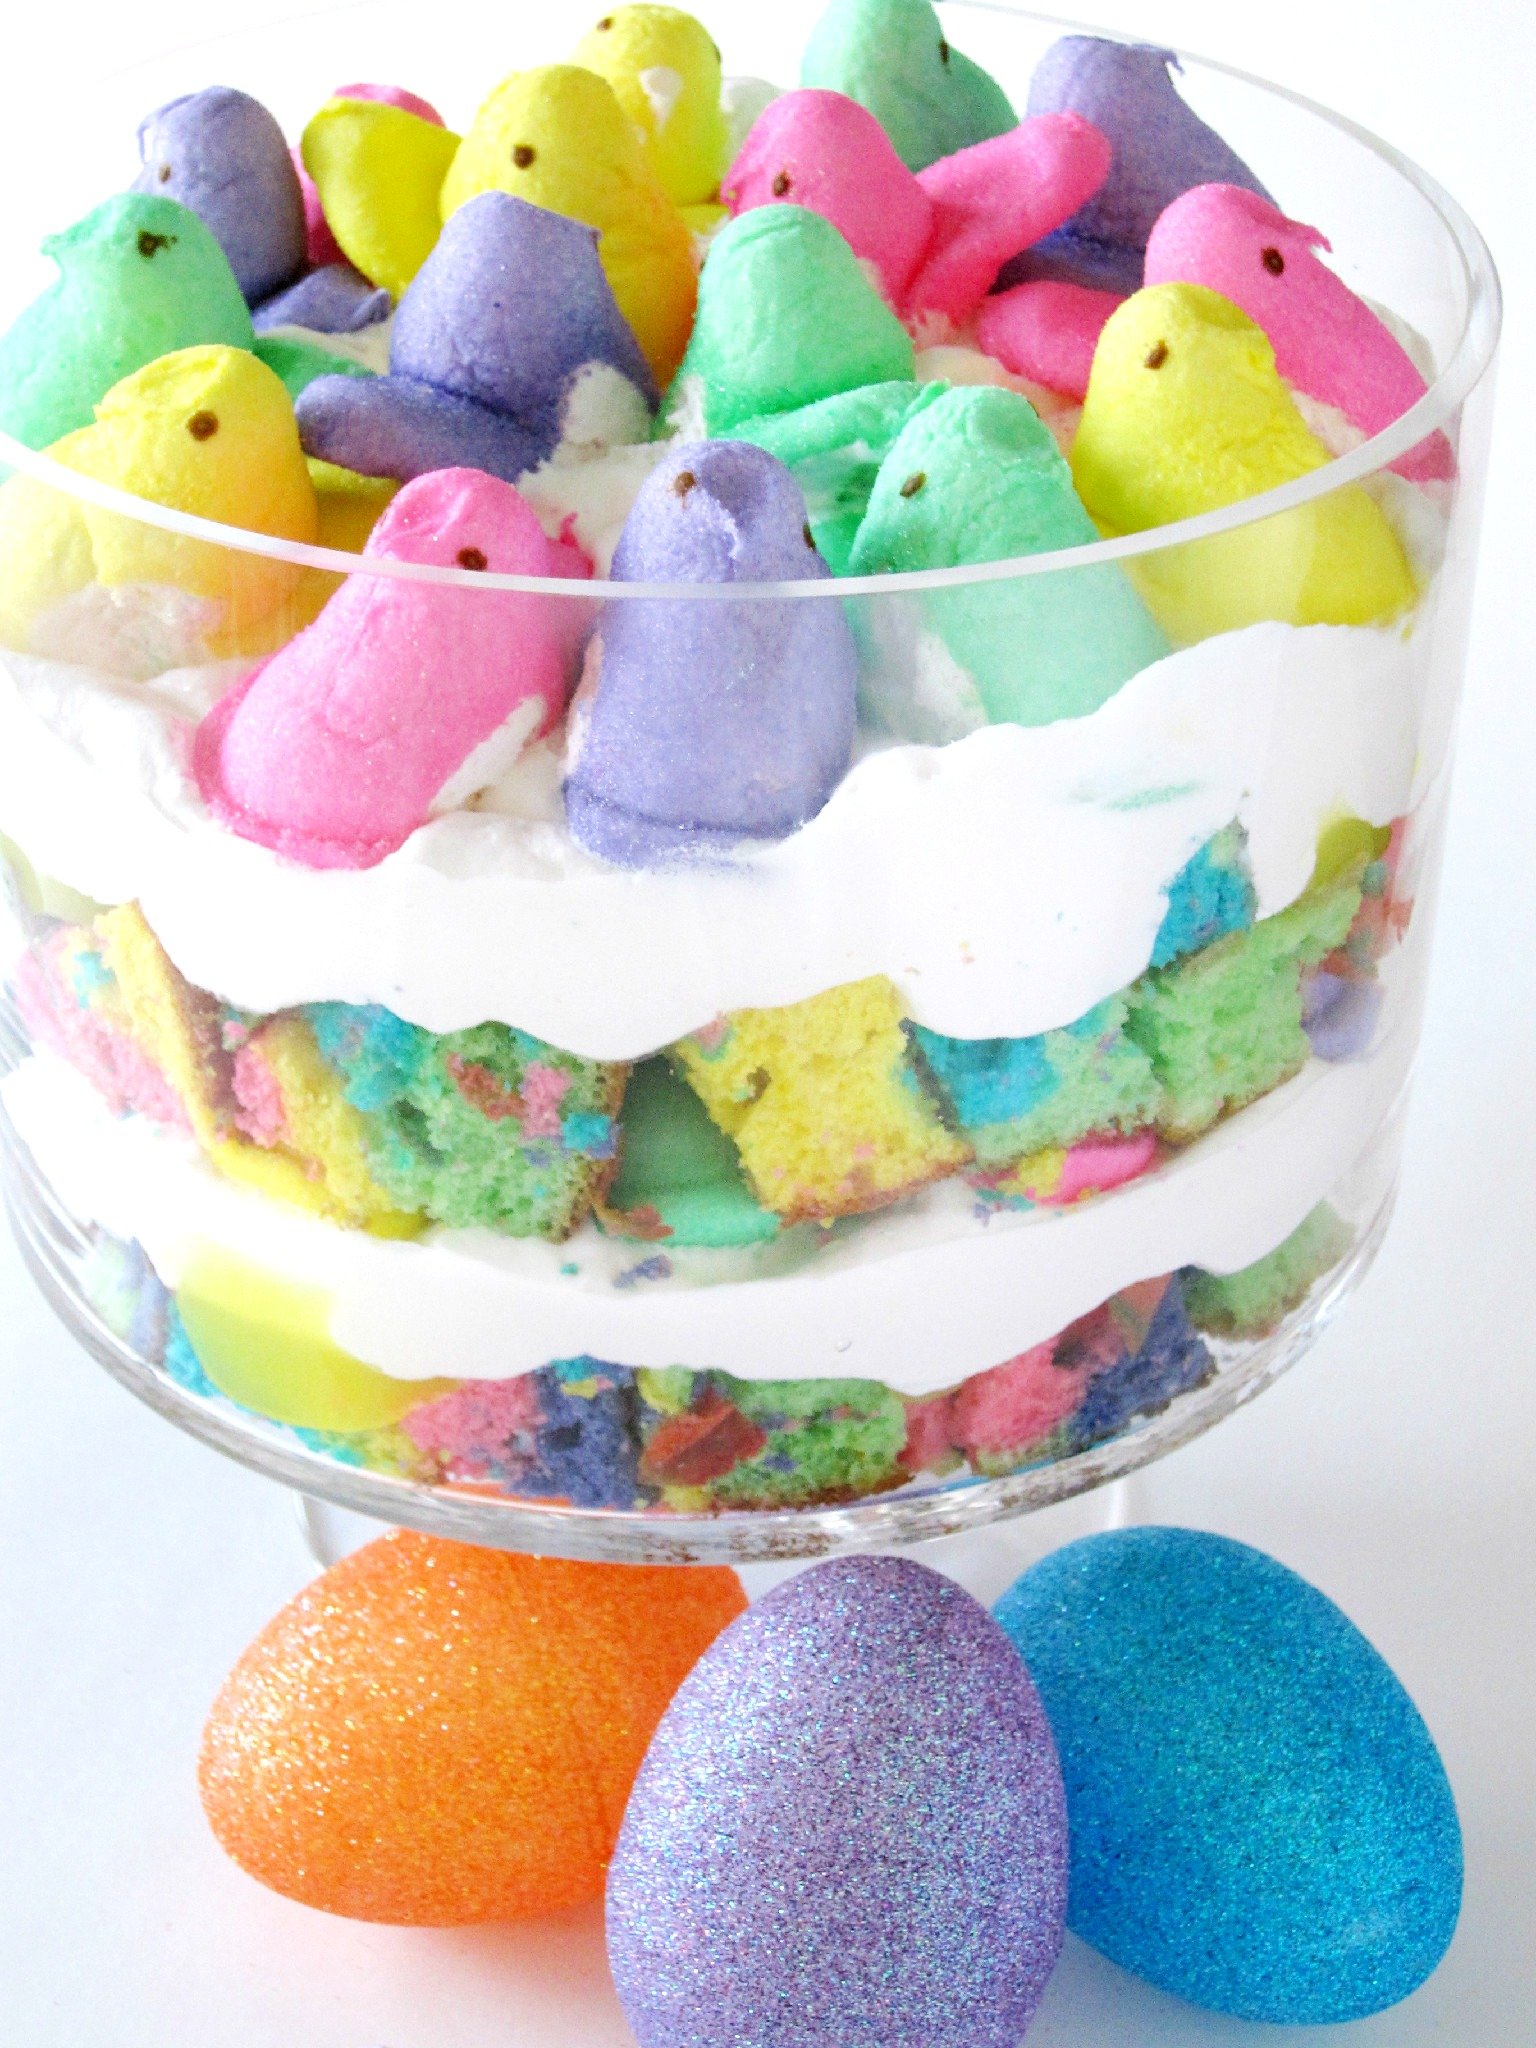 25 Fun Peeps Ideas for Easter   Crazy Little Projects